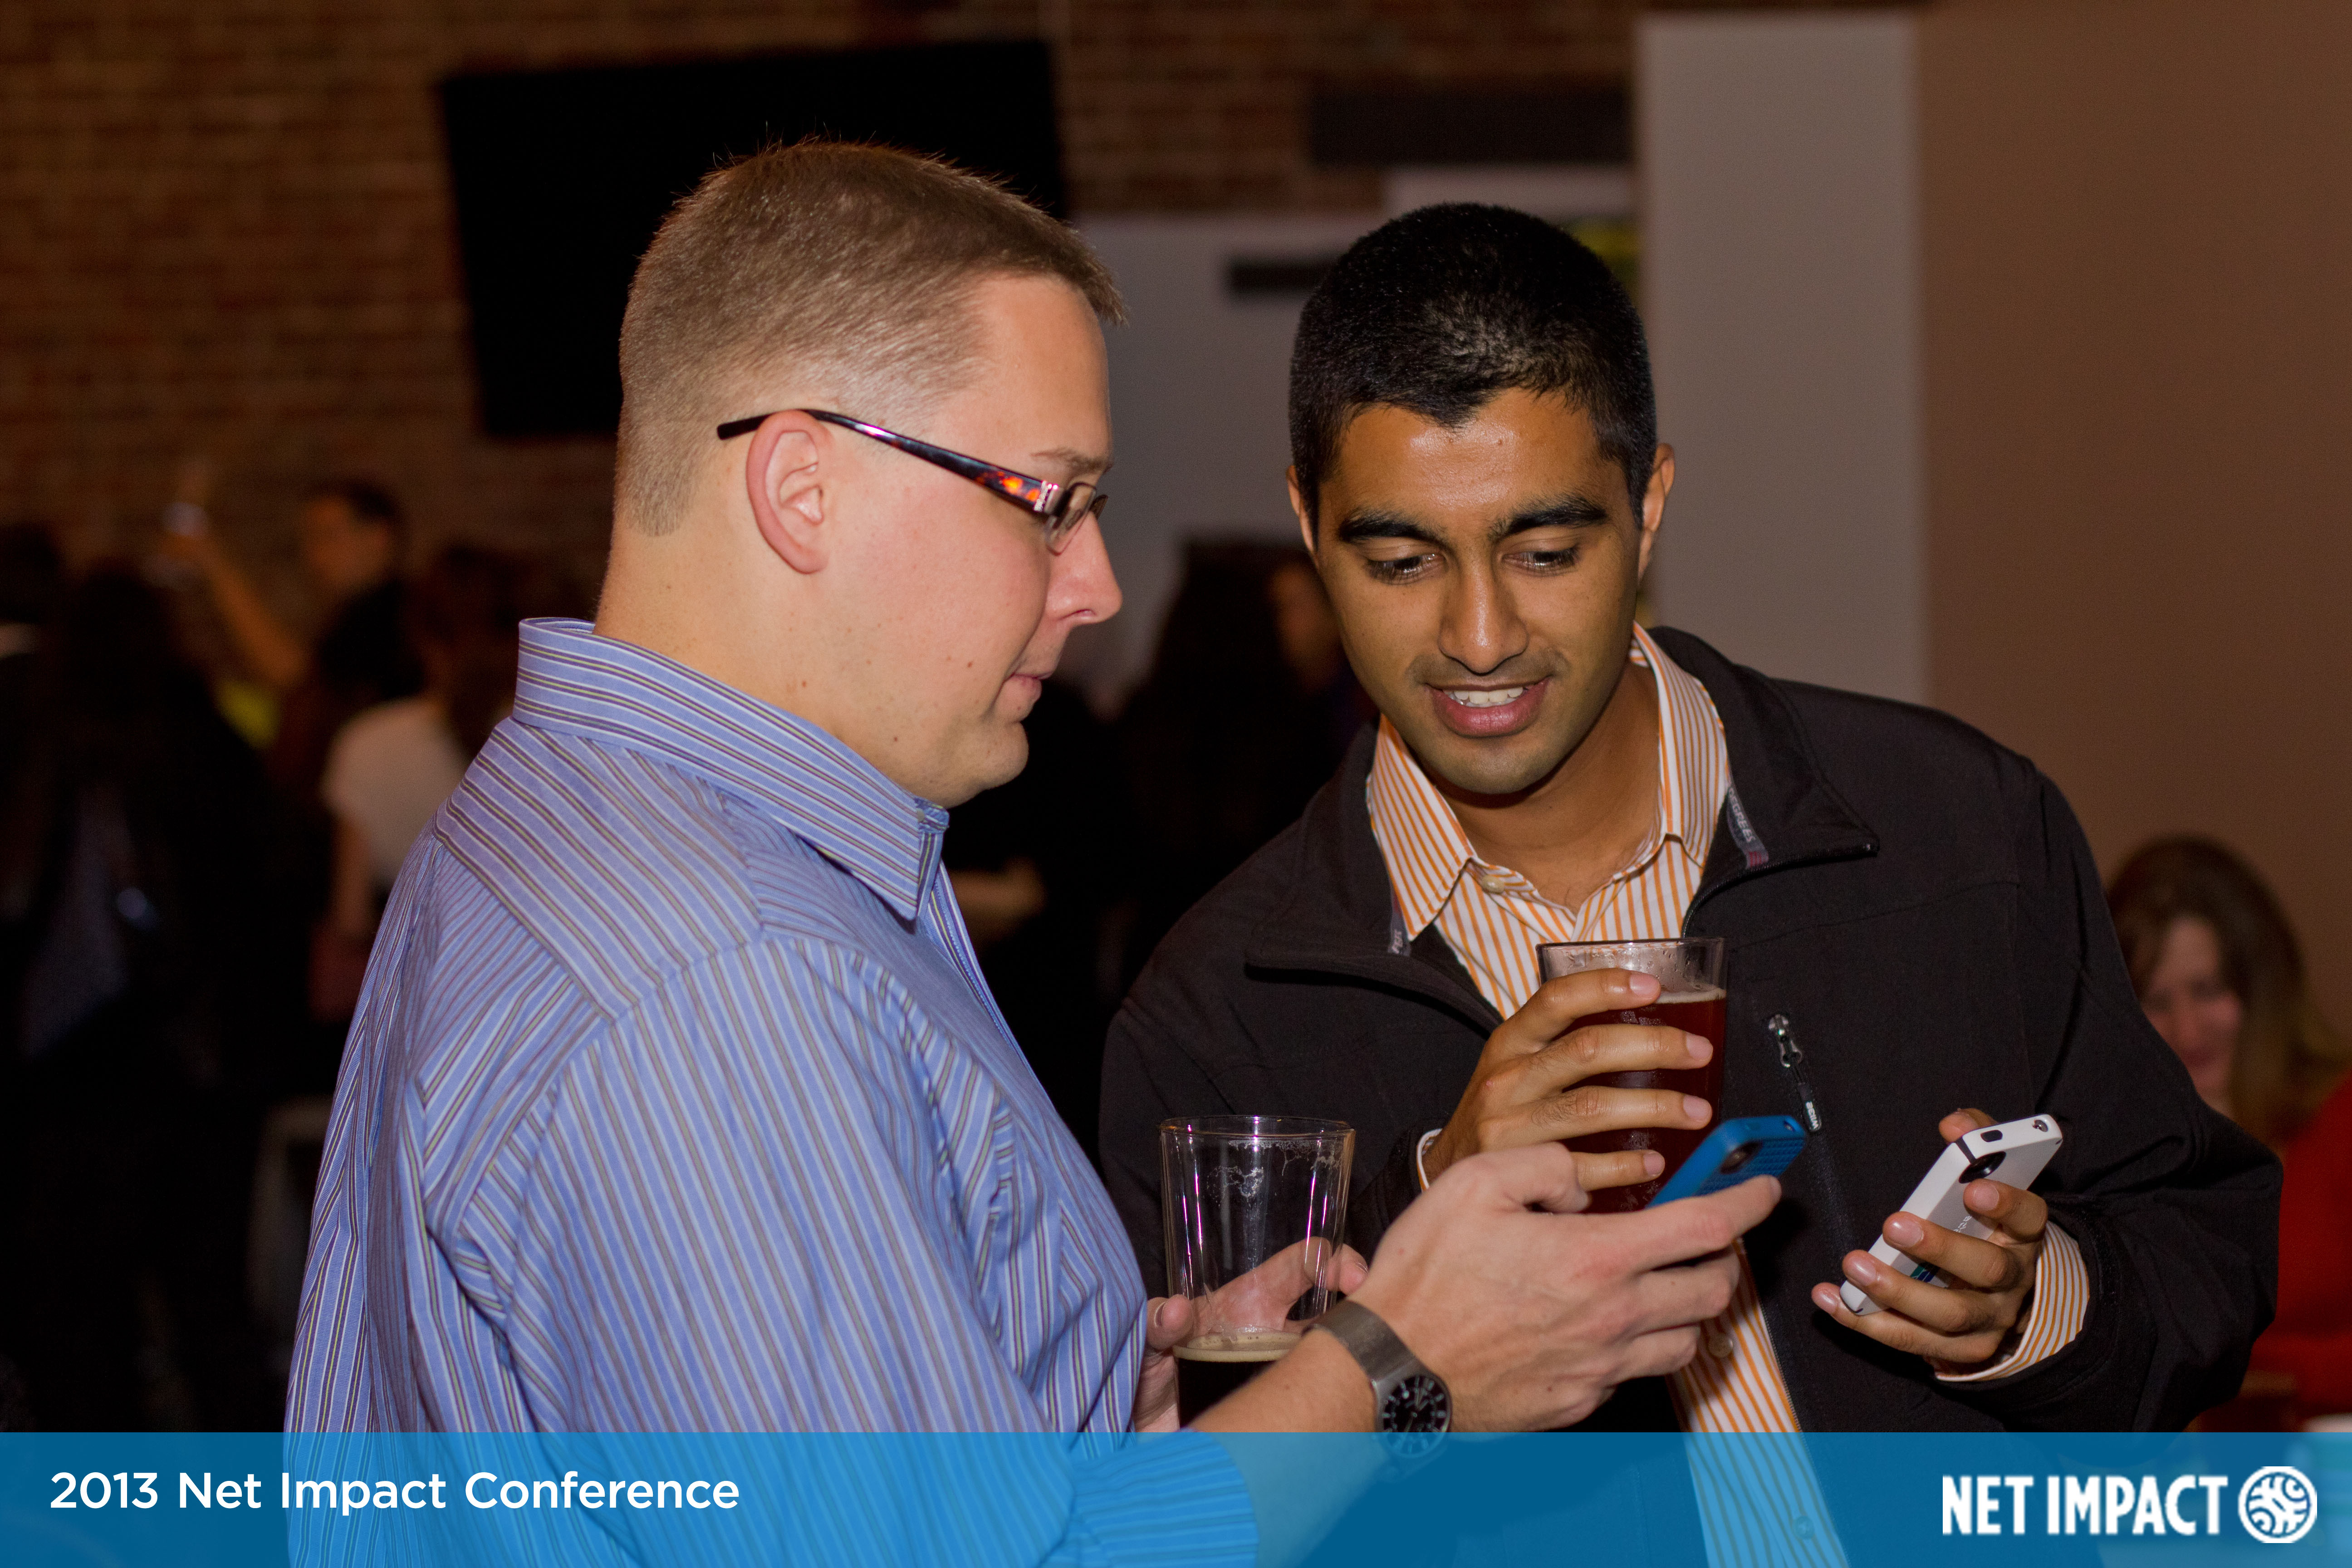 Networking at the 2013 Net Impact Conference